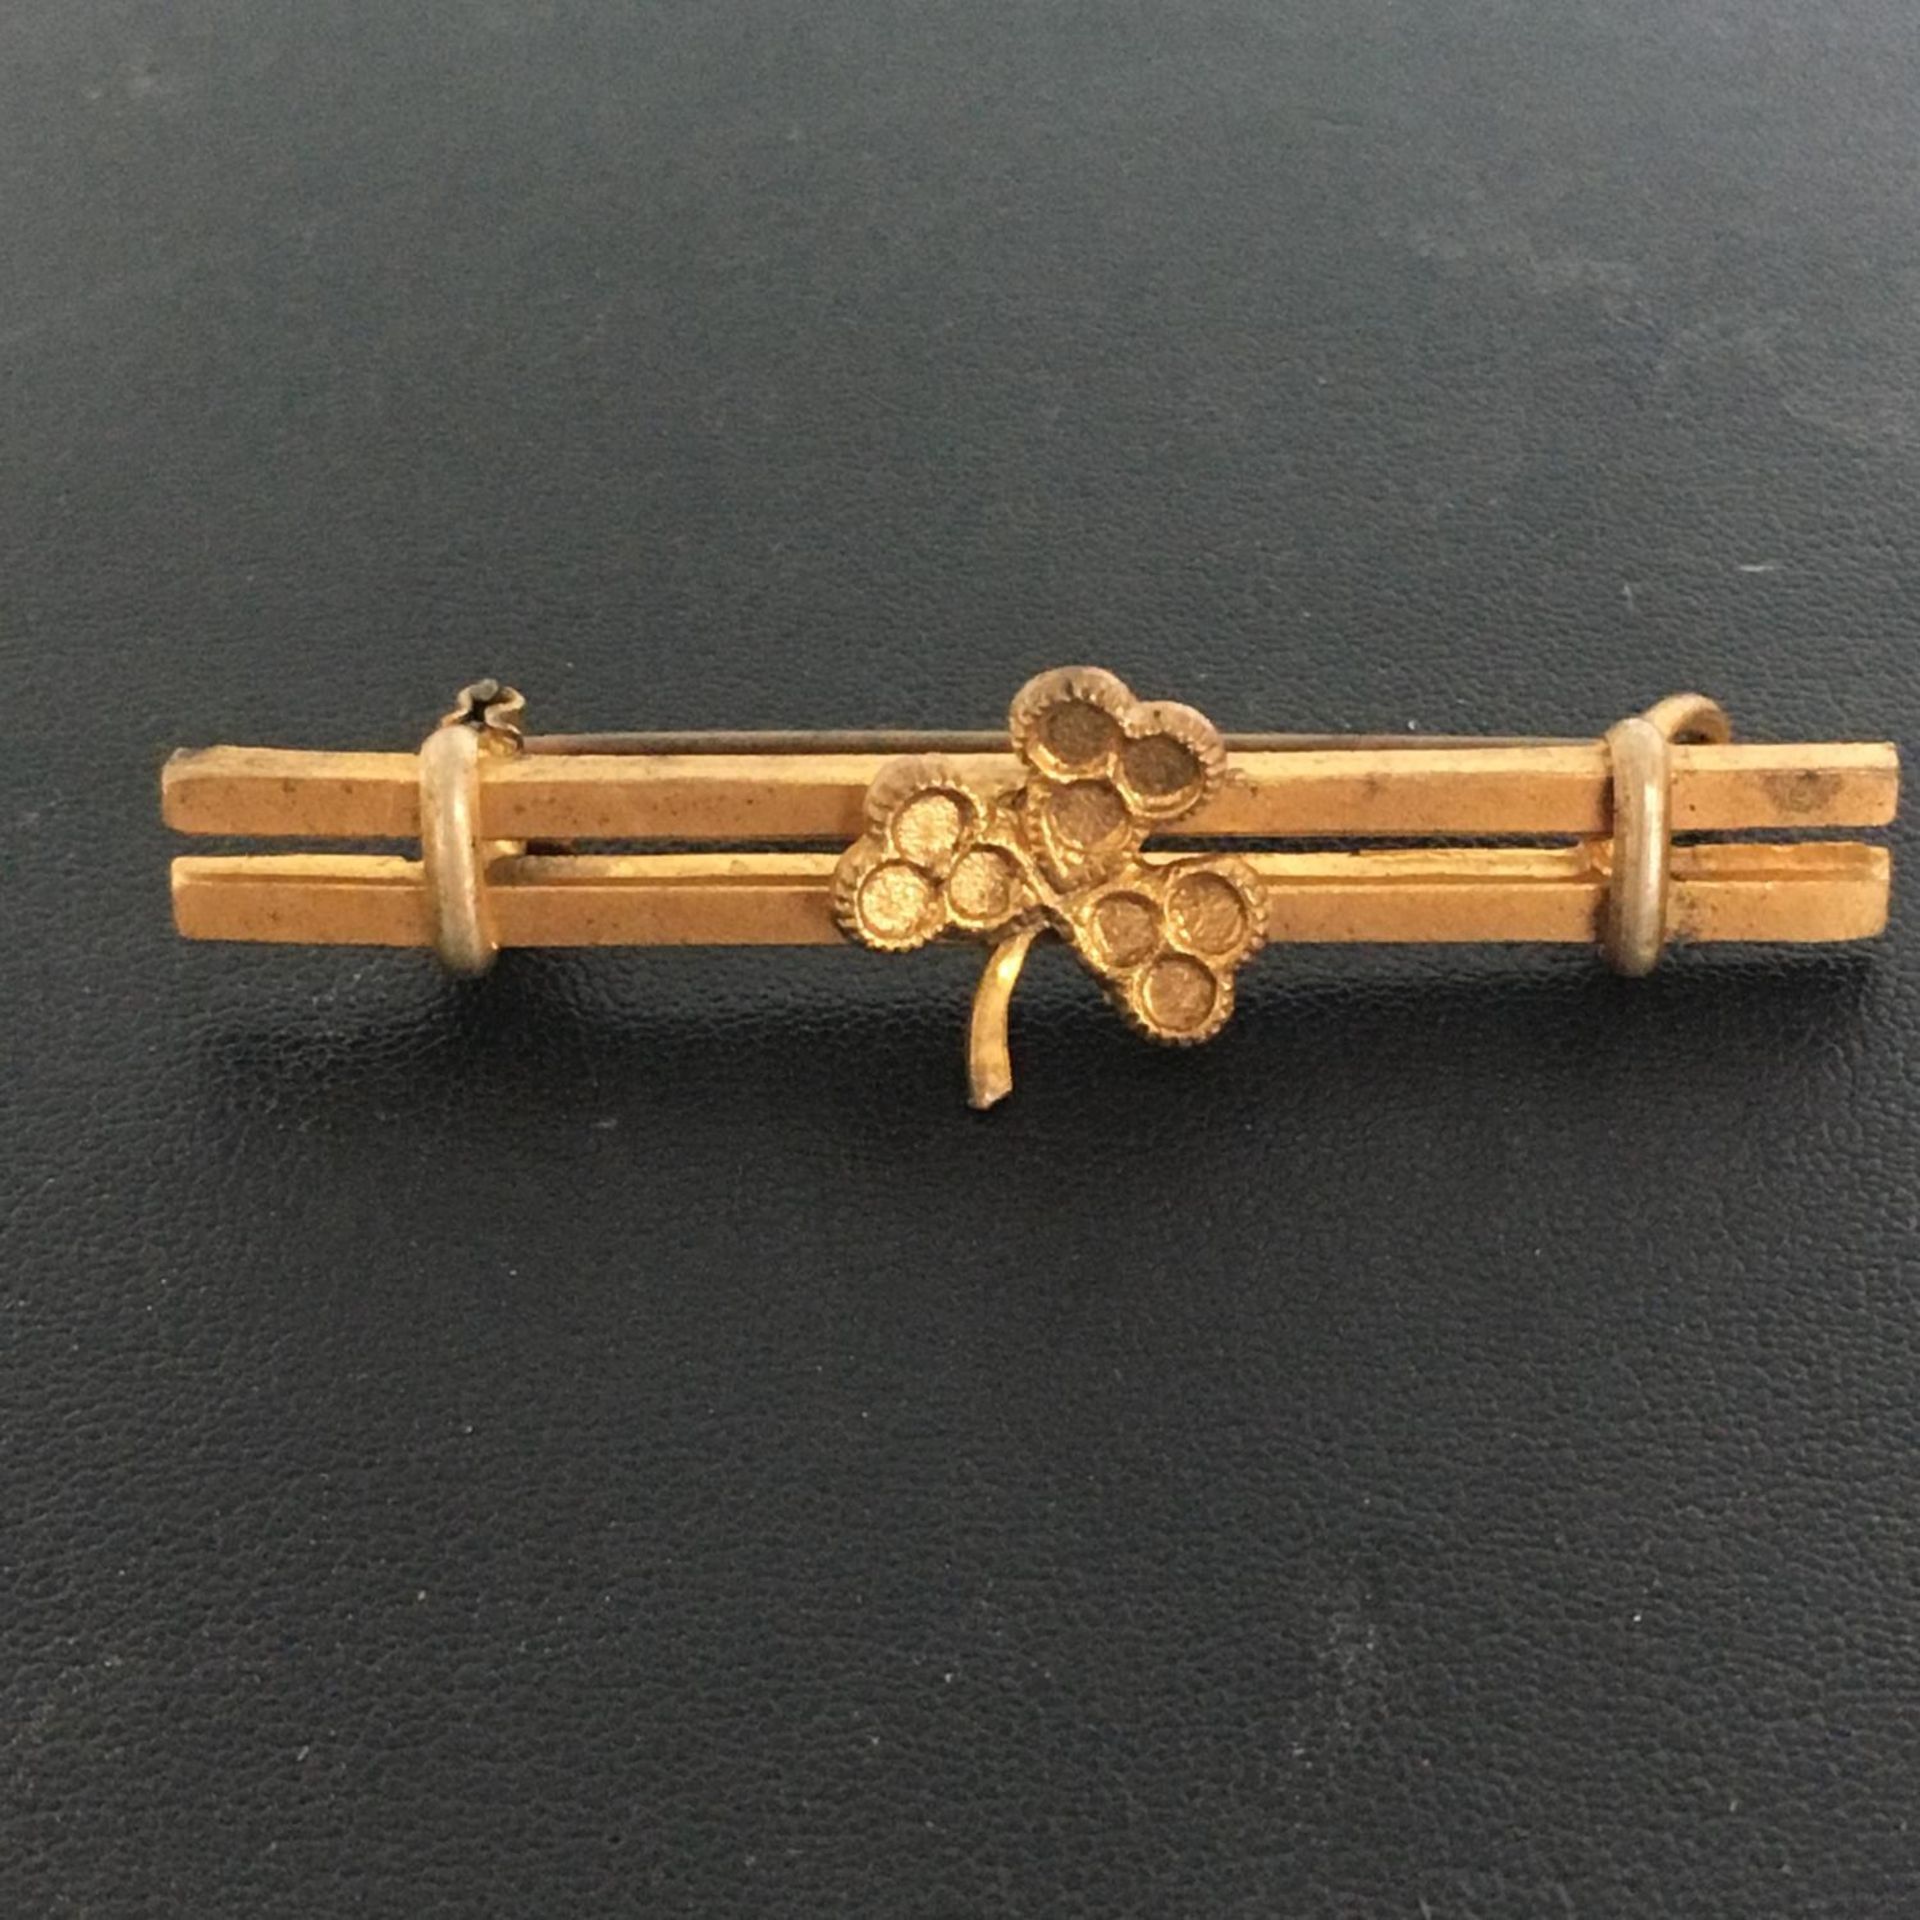 TWO BAR CLOVER DESIGN BAR BROOCH. In yellow metal. The hammer price includes free packing & shipping